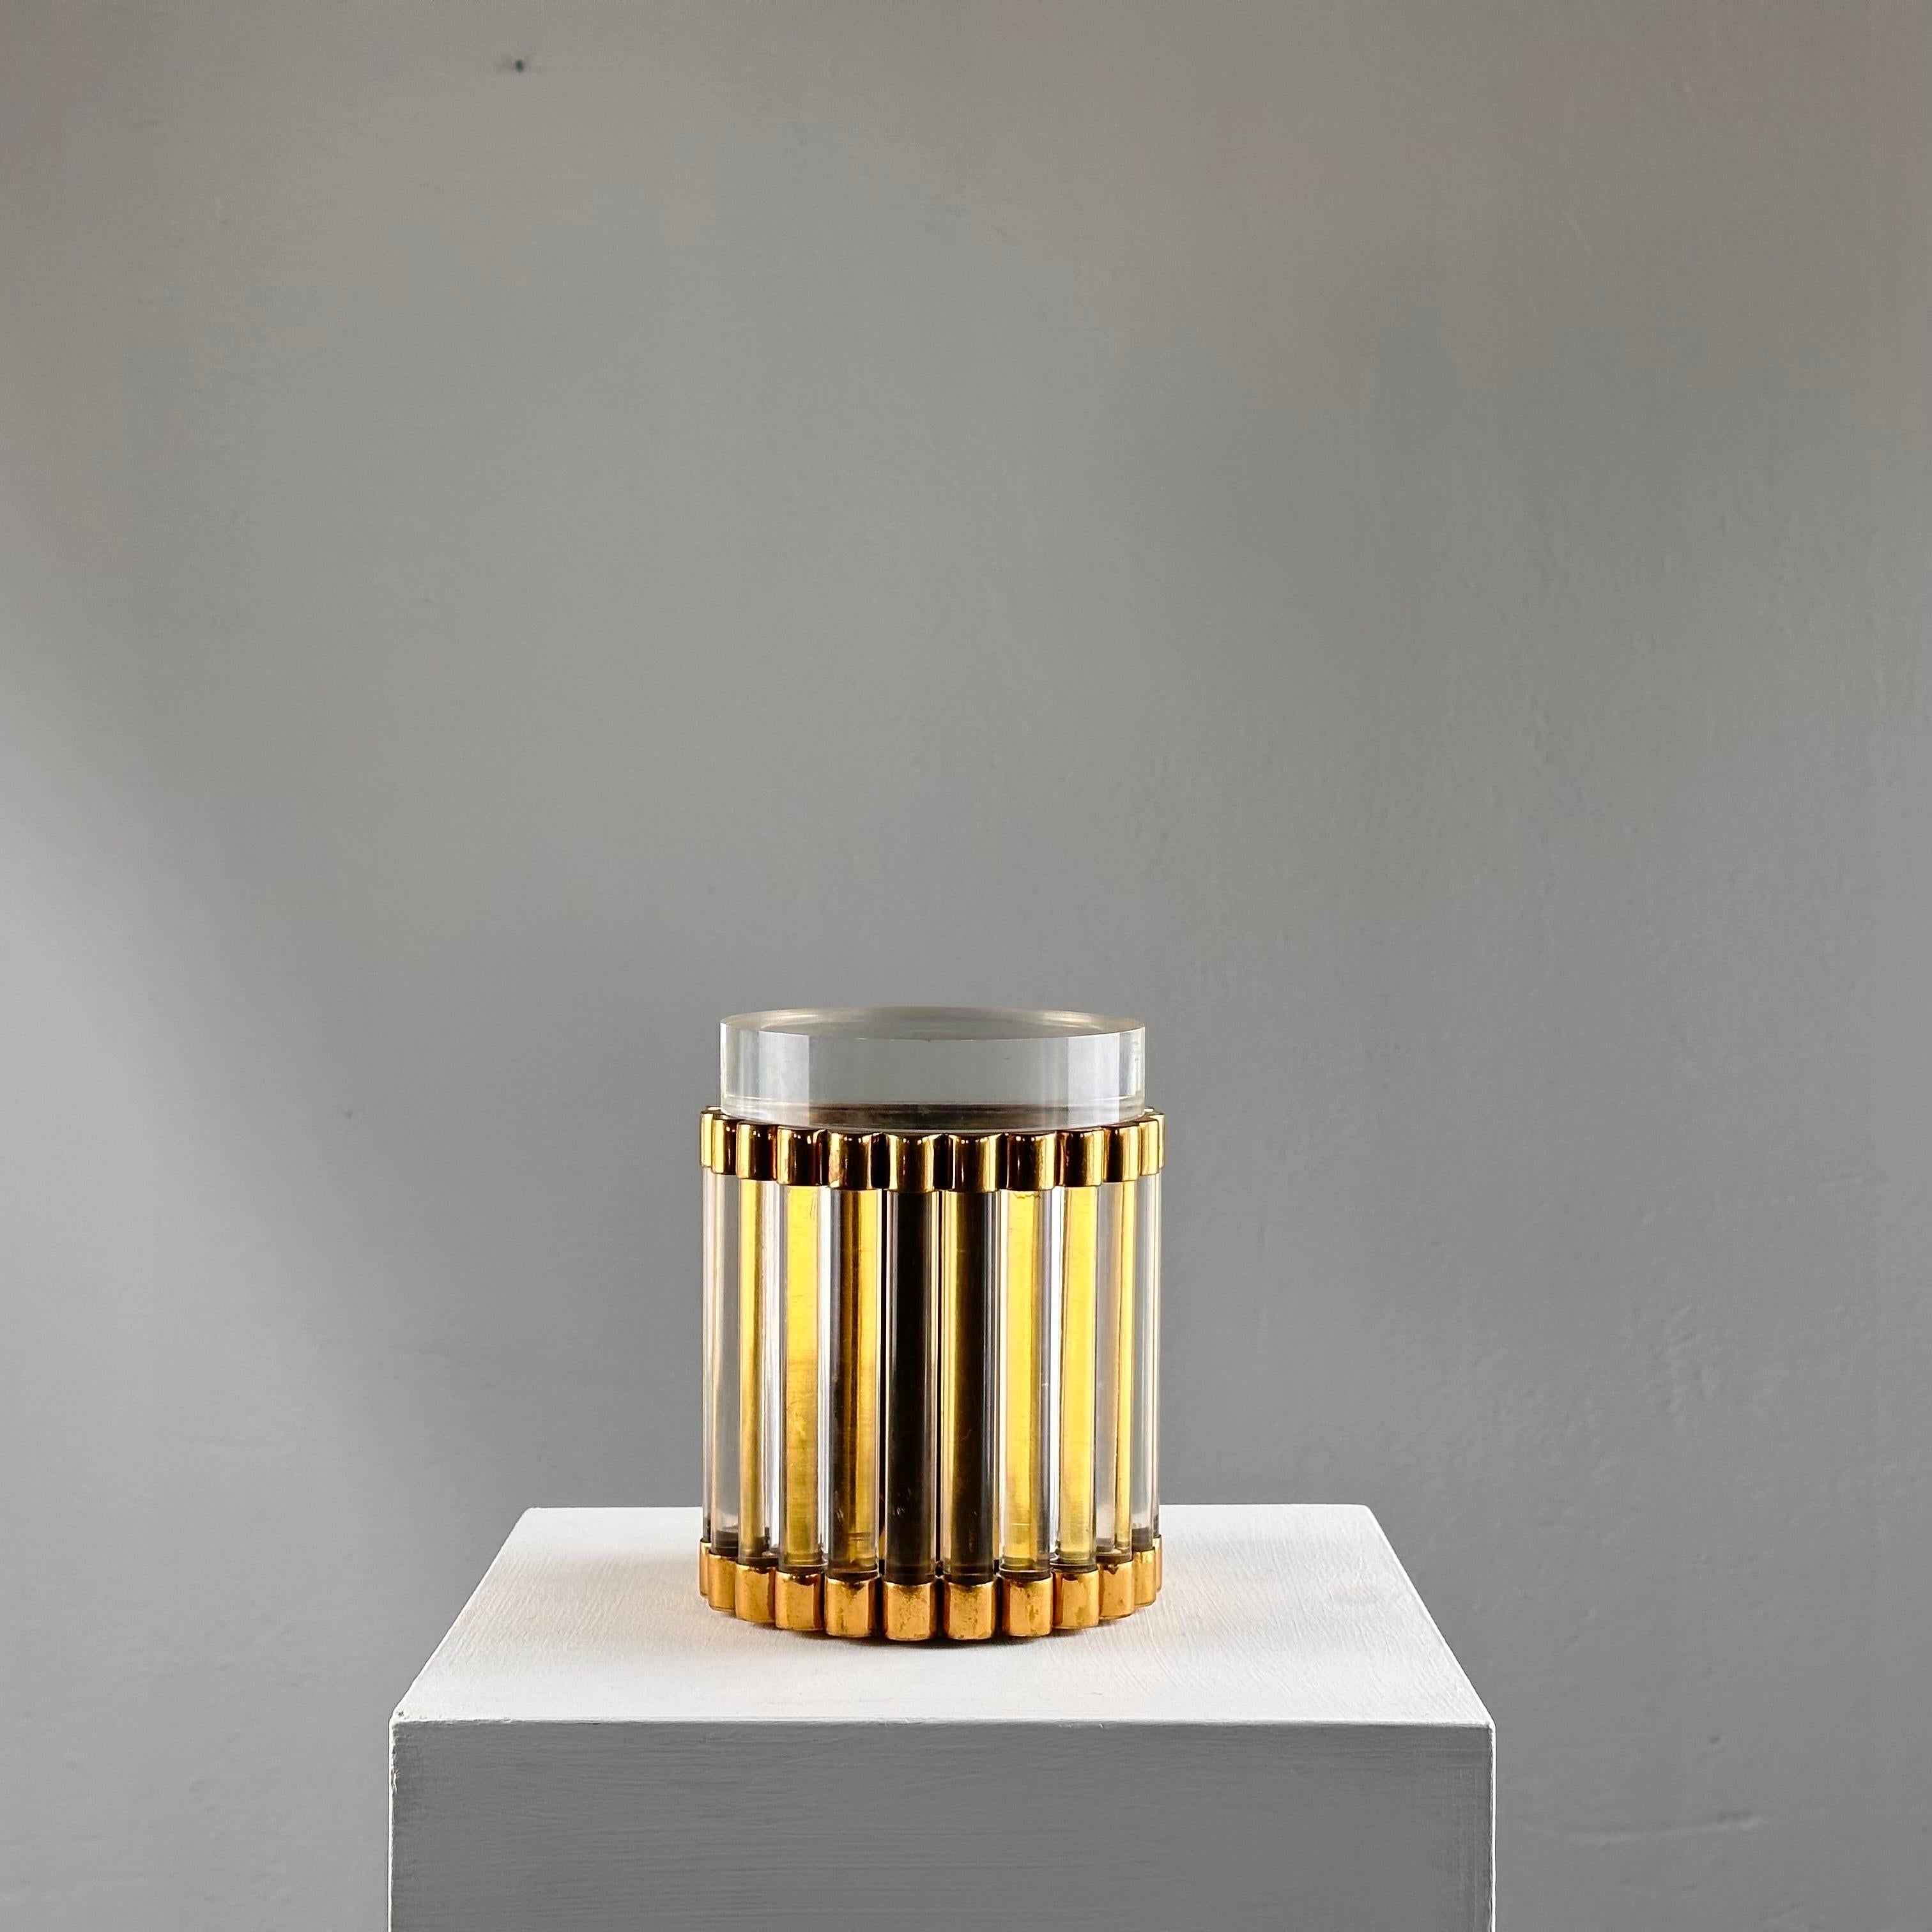 Discover the epitome of mid-century elegance with this exquisite Round Box / Bottle Basket by renowned Italian designer Gabriella Crespi. Crafted in the glamorous 1970s, this unique piece seamlessly merges form and function, showcasing Crespi's